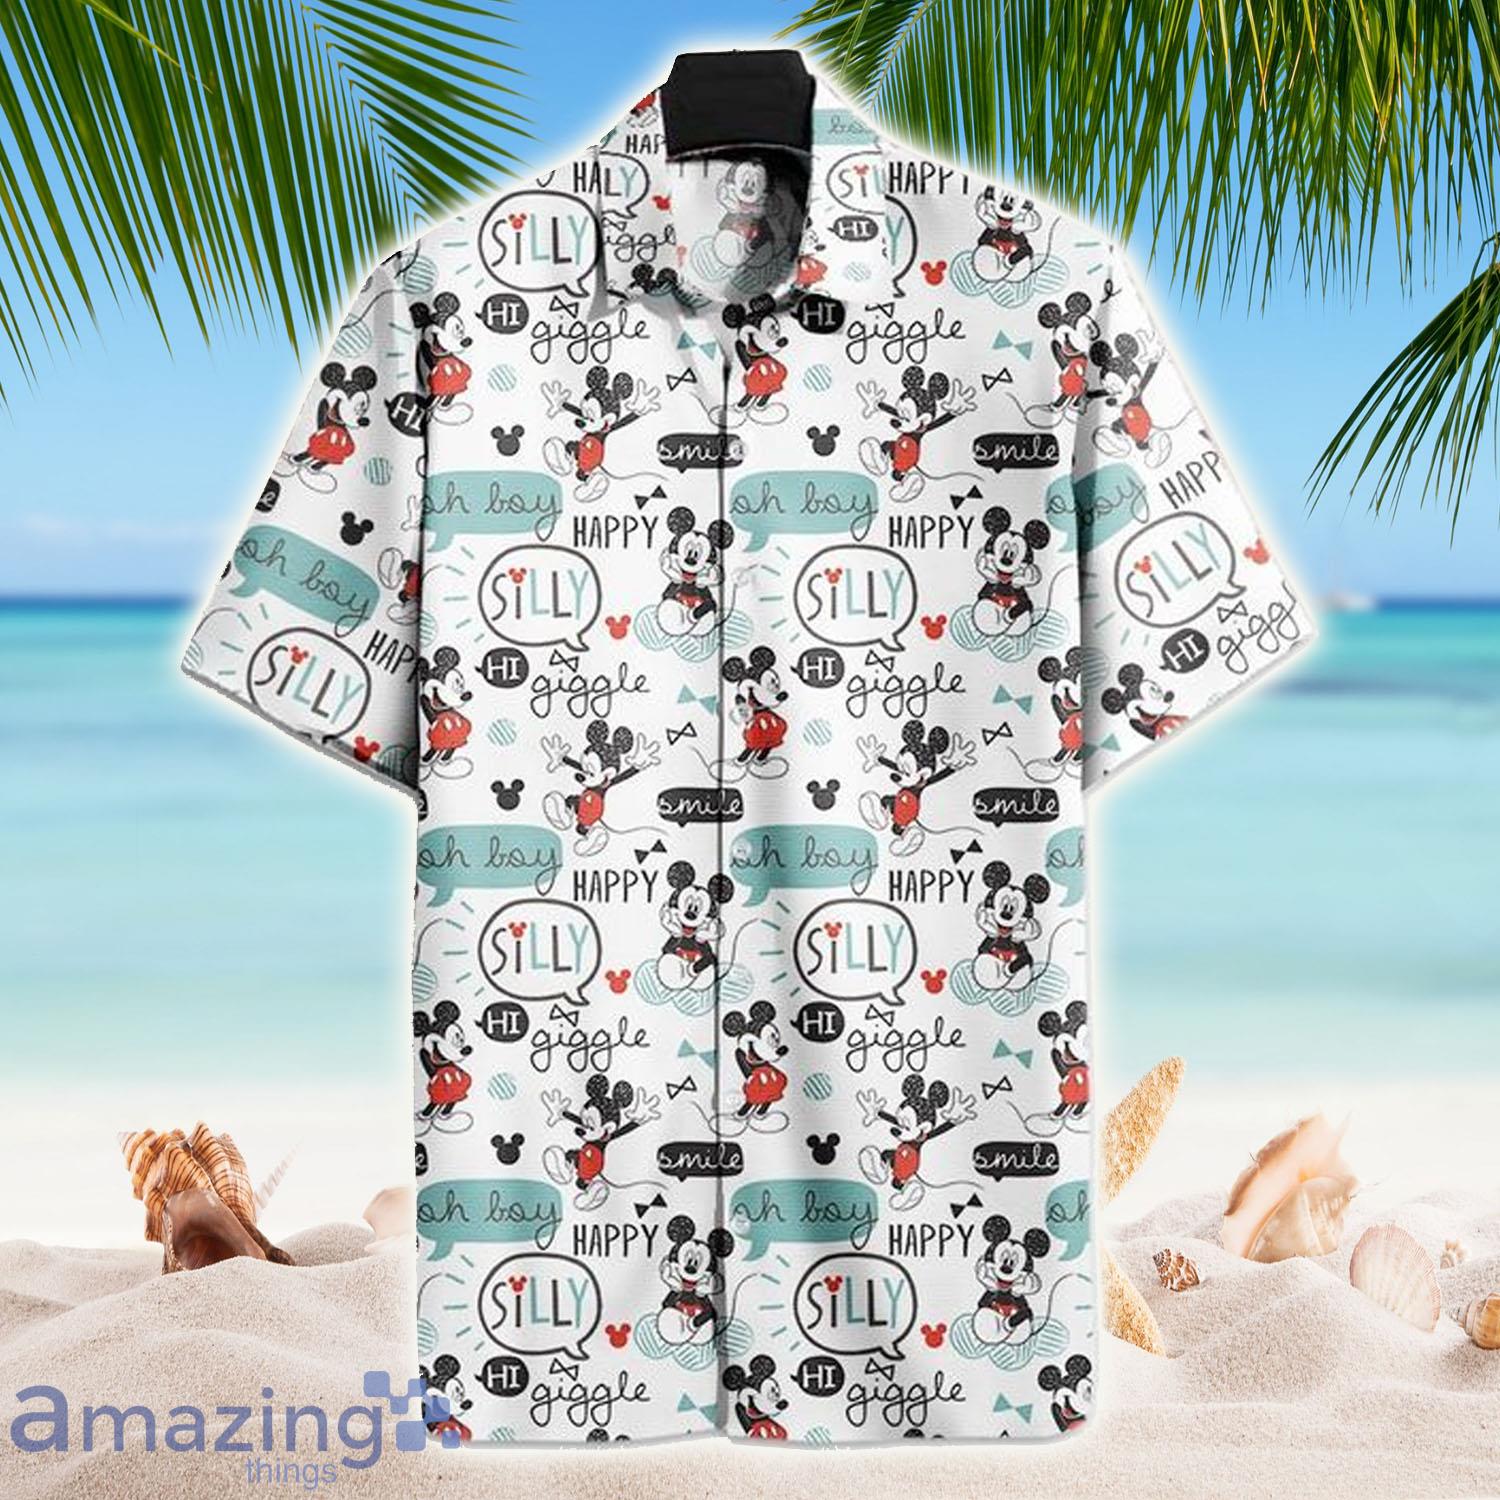 Mickey Mouse Oh Boy Happy Silly Movies Disney Hawaiian Shirt - Mickey Mouse Oh Boy Happy Silly Movies Disney Hawaiian Shirt